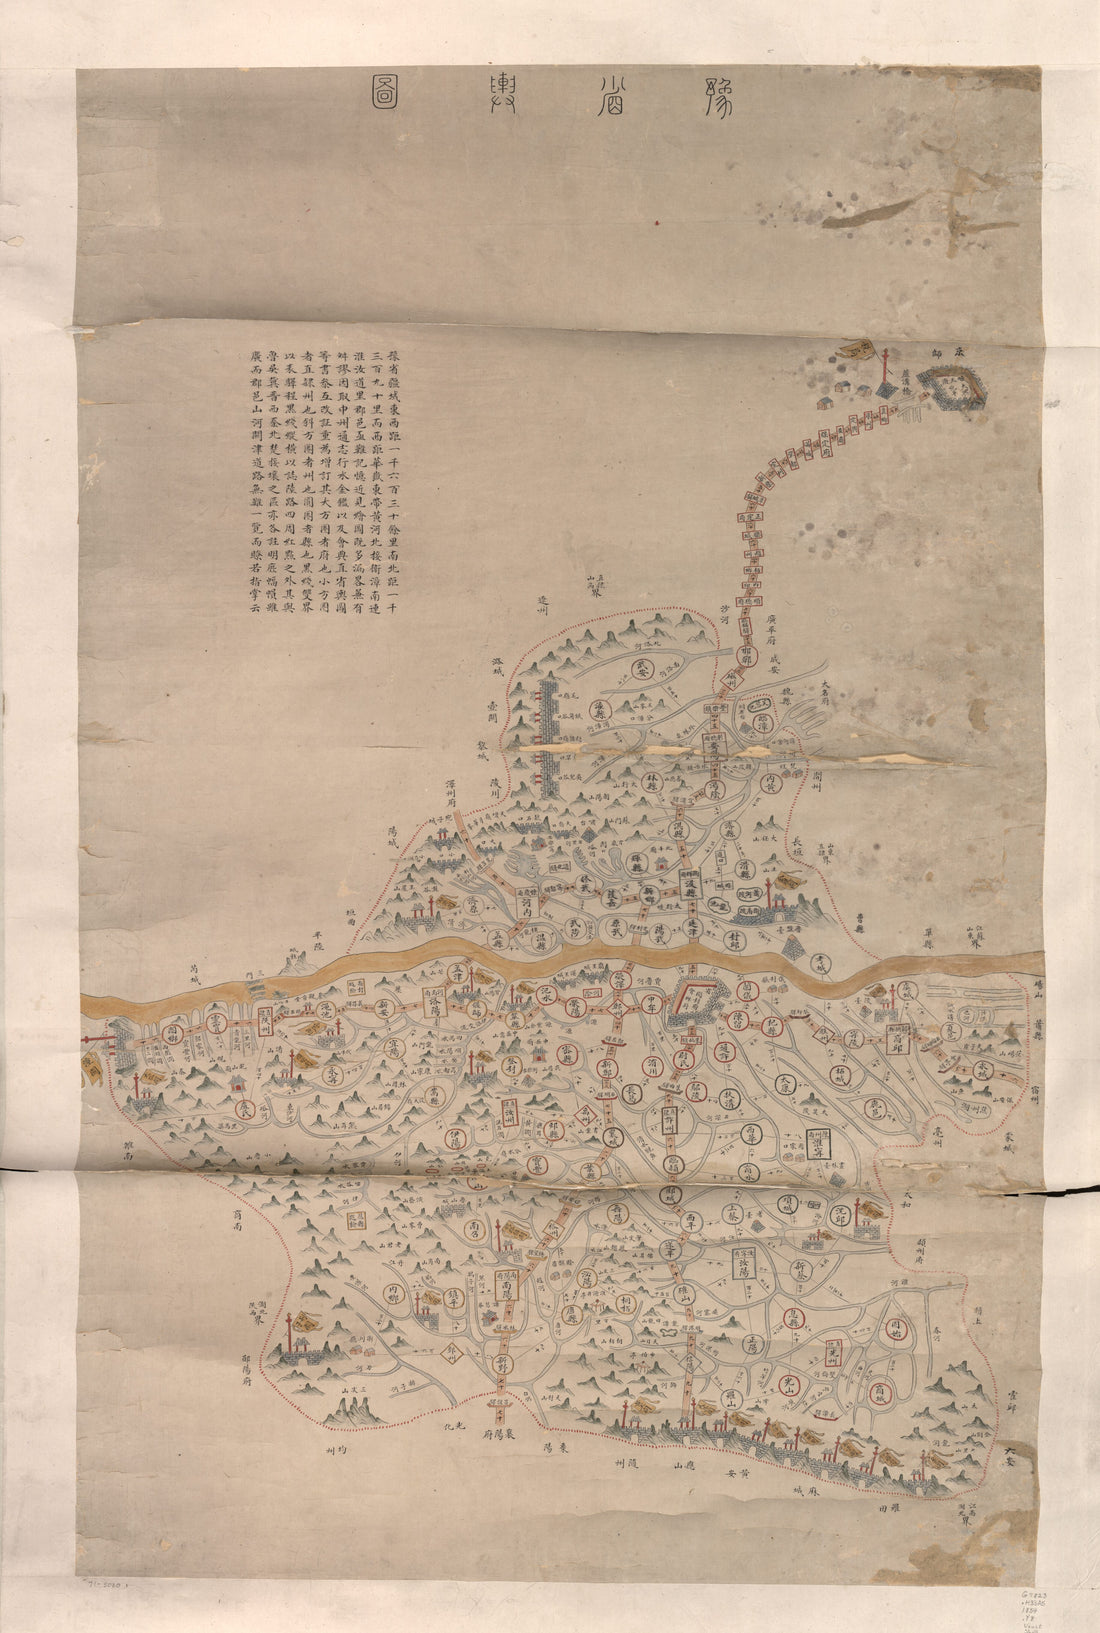 This old map of Yu Sheng Yu Tu. (豫省輿圖, Jing Hui Henan Tu, Map of Henan Province) from 1832 was created by Arthur W. (Arthur William) Hummel in 1832